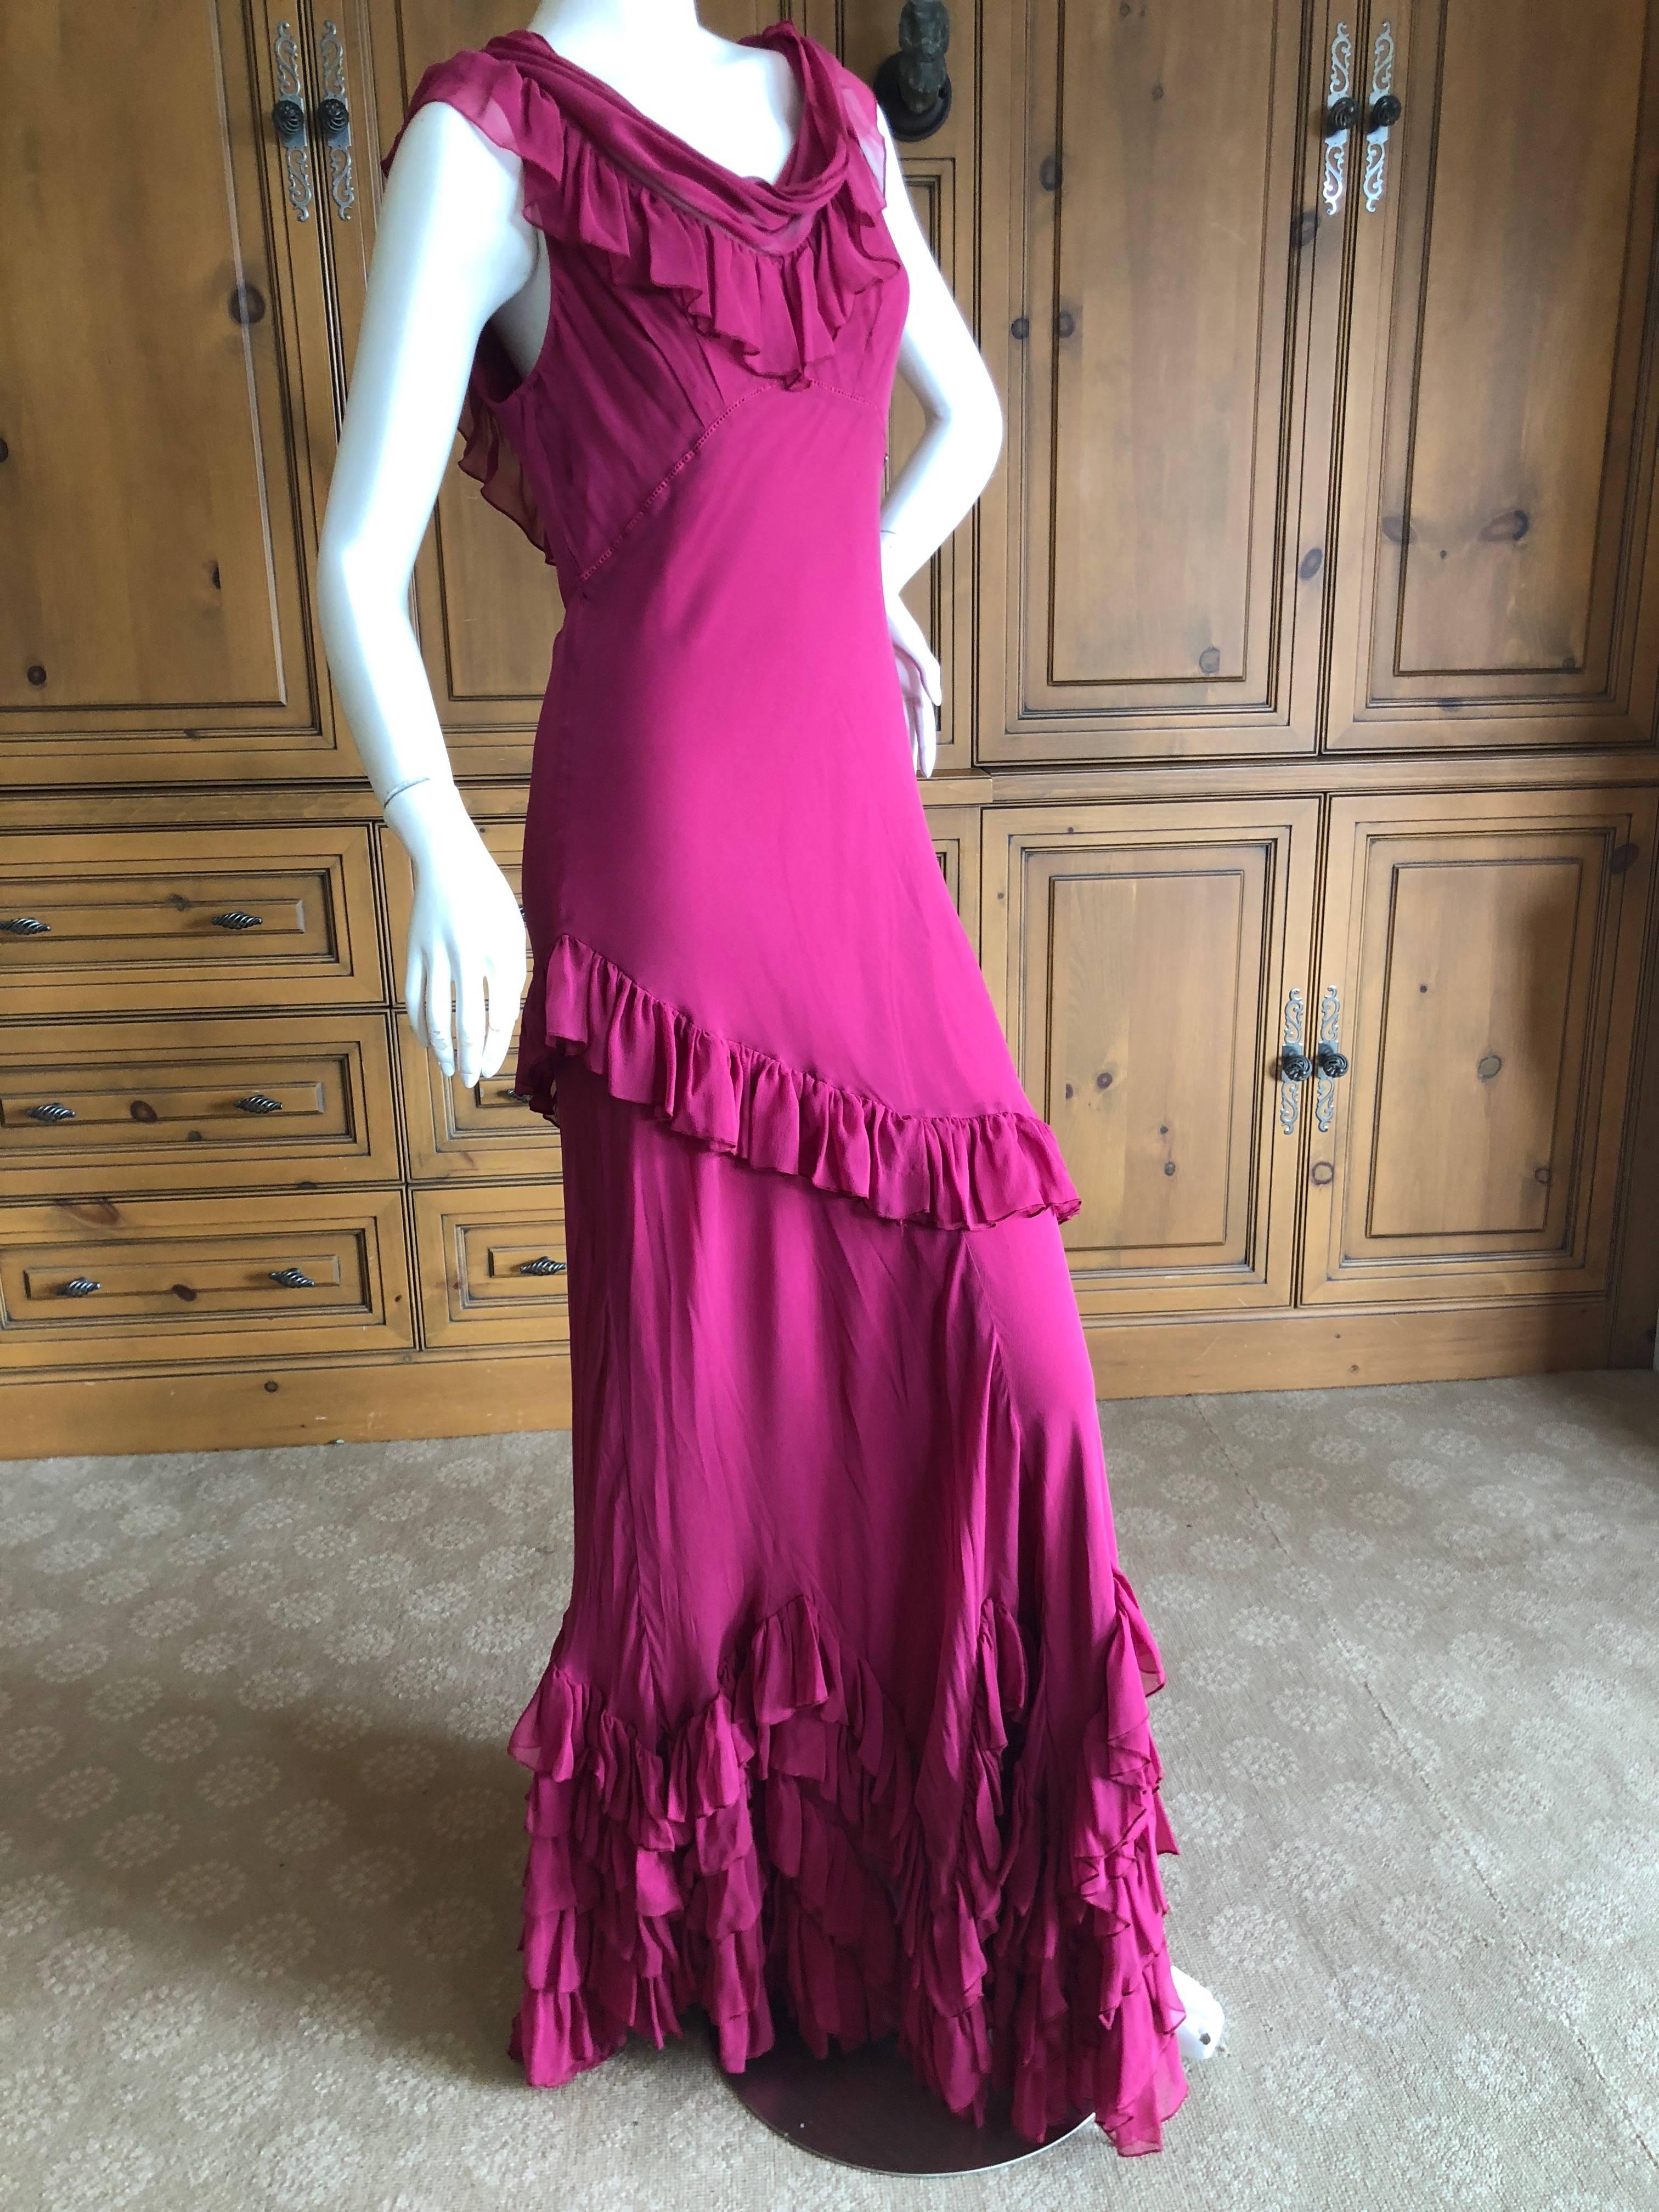 John Galliano Raspberry Sheer Vintage Silk Ruffled Evening Dress with Cowl Back  For Sale 2